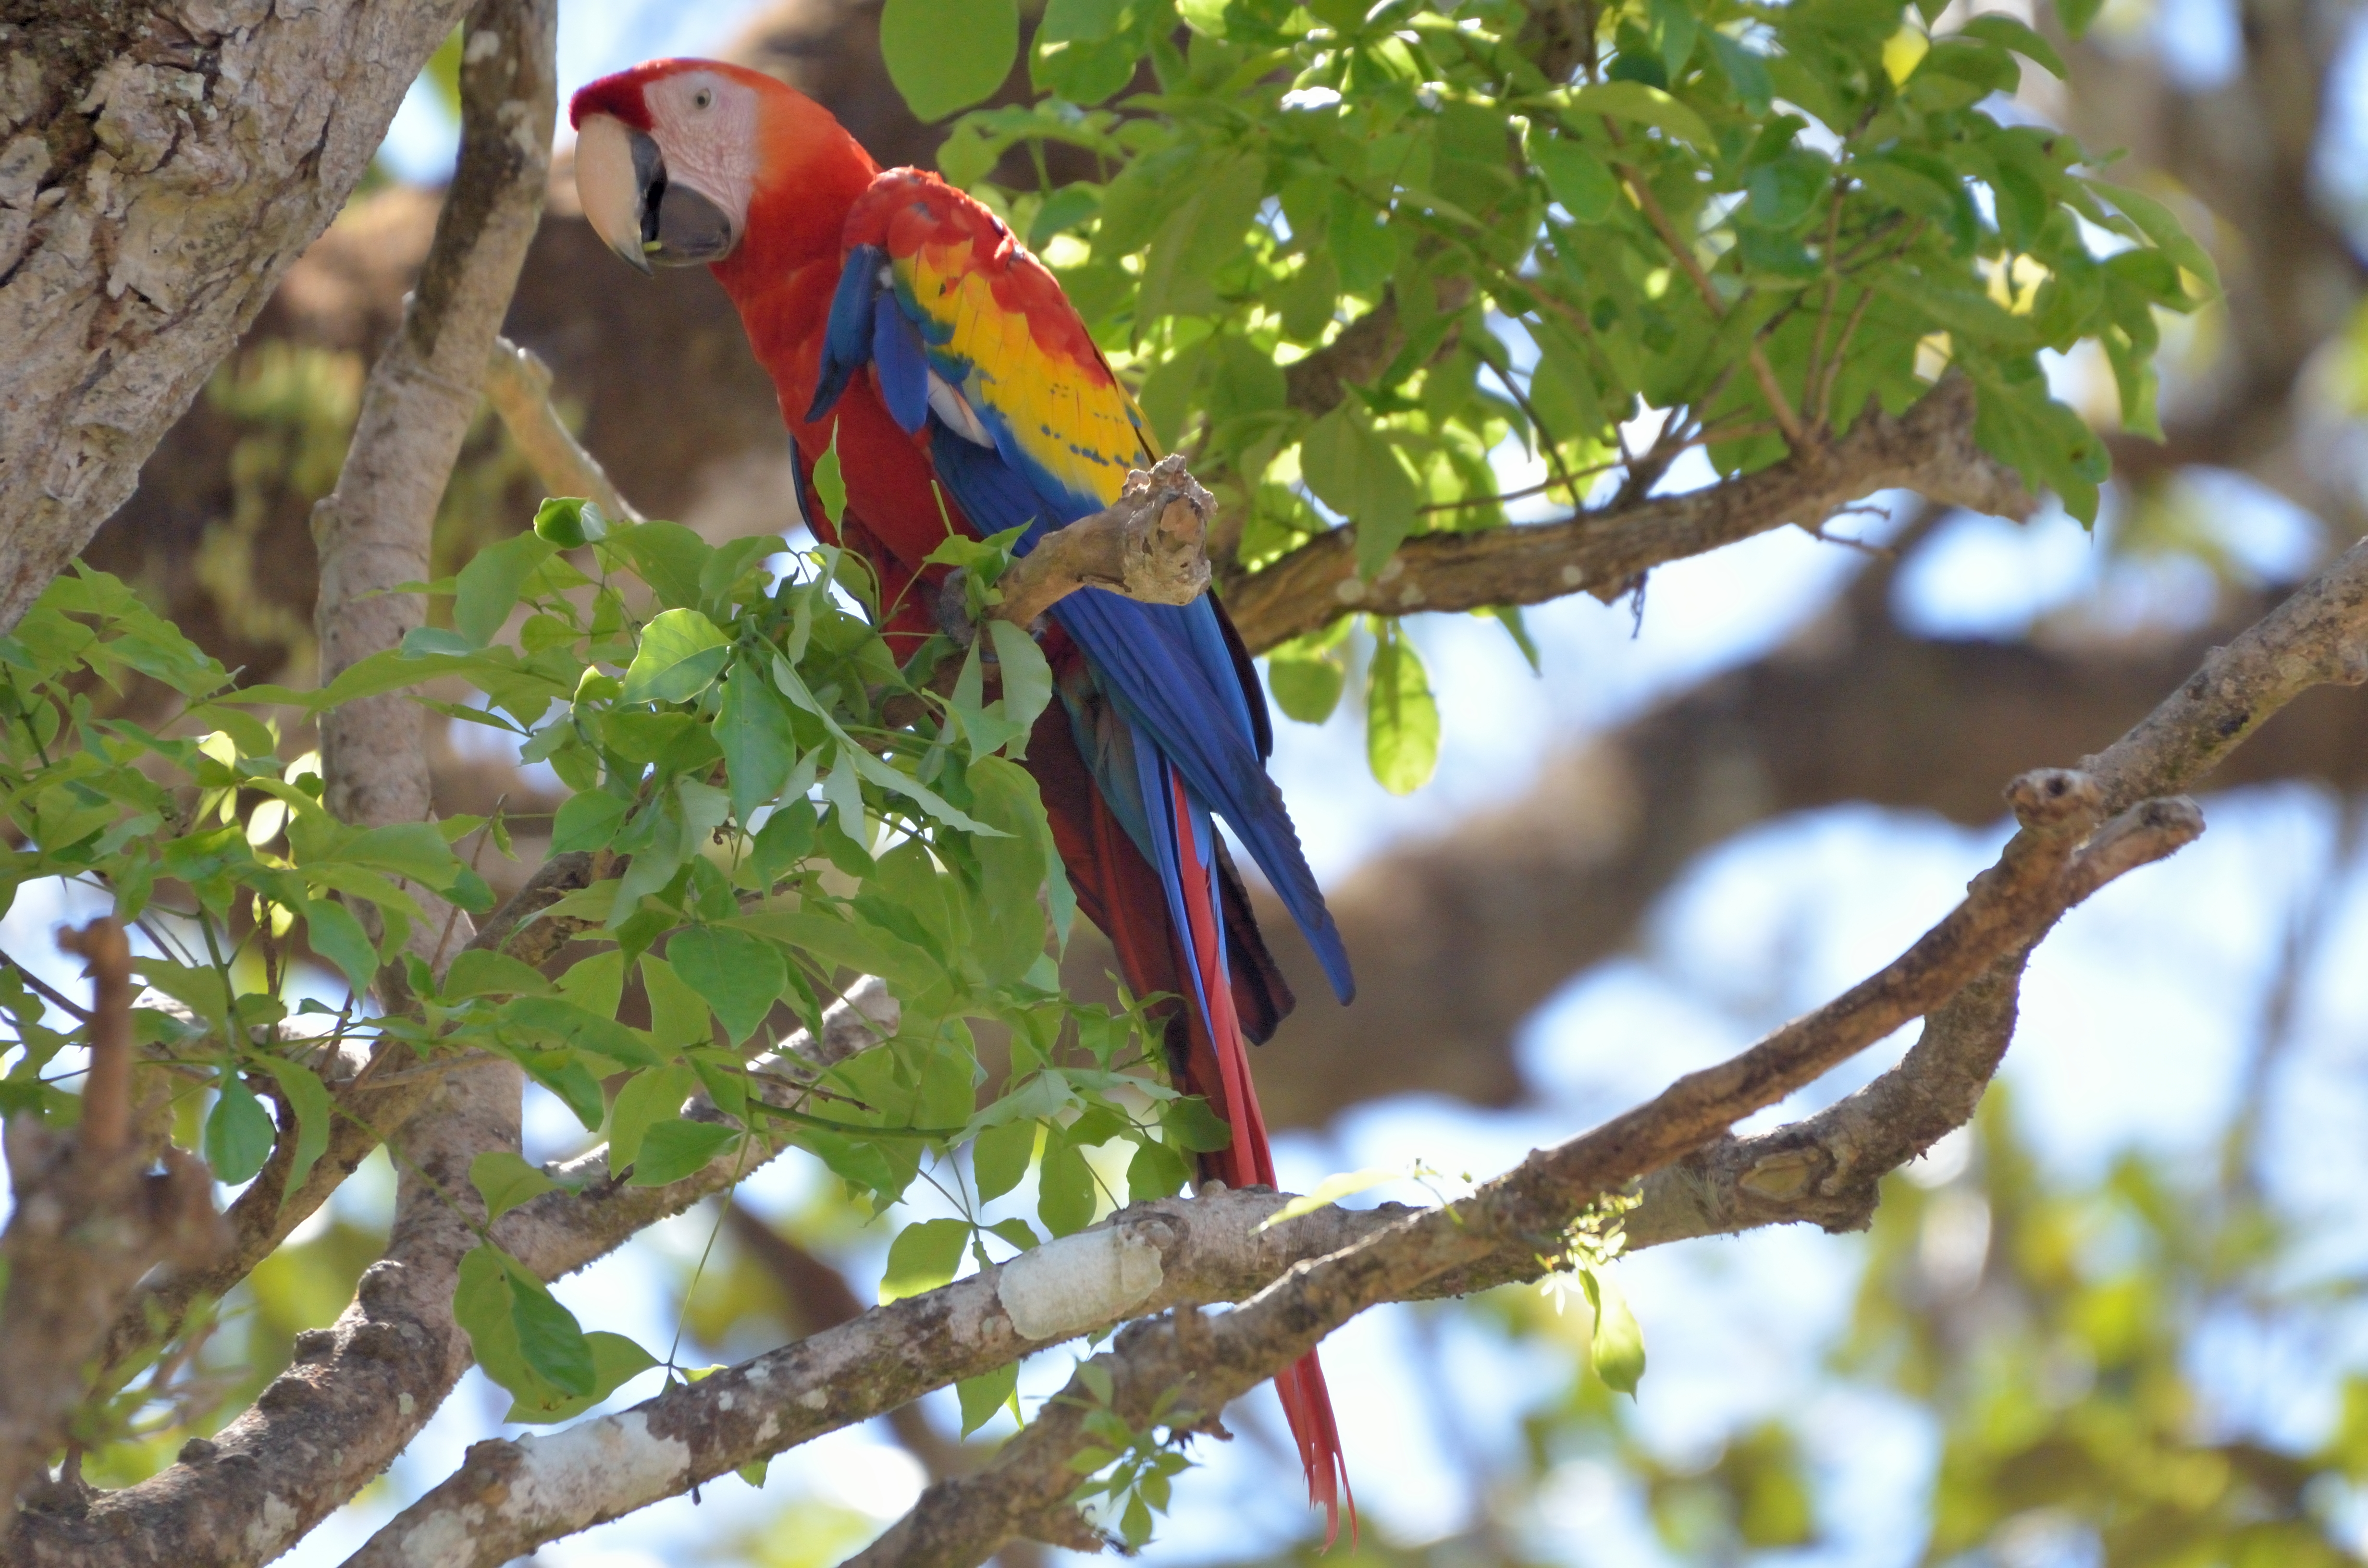 Click picture to see more Scarlet Macaws.